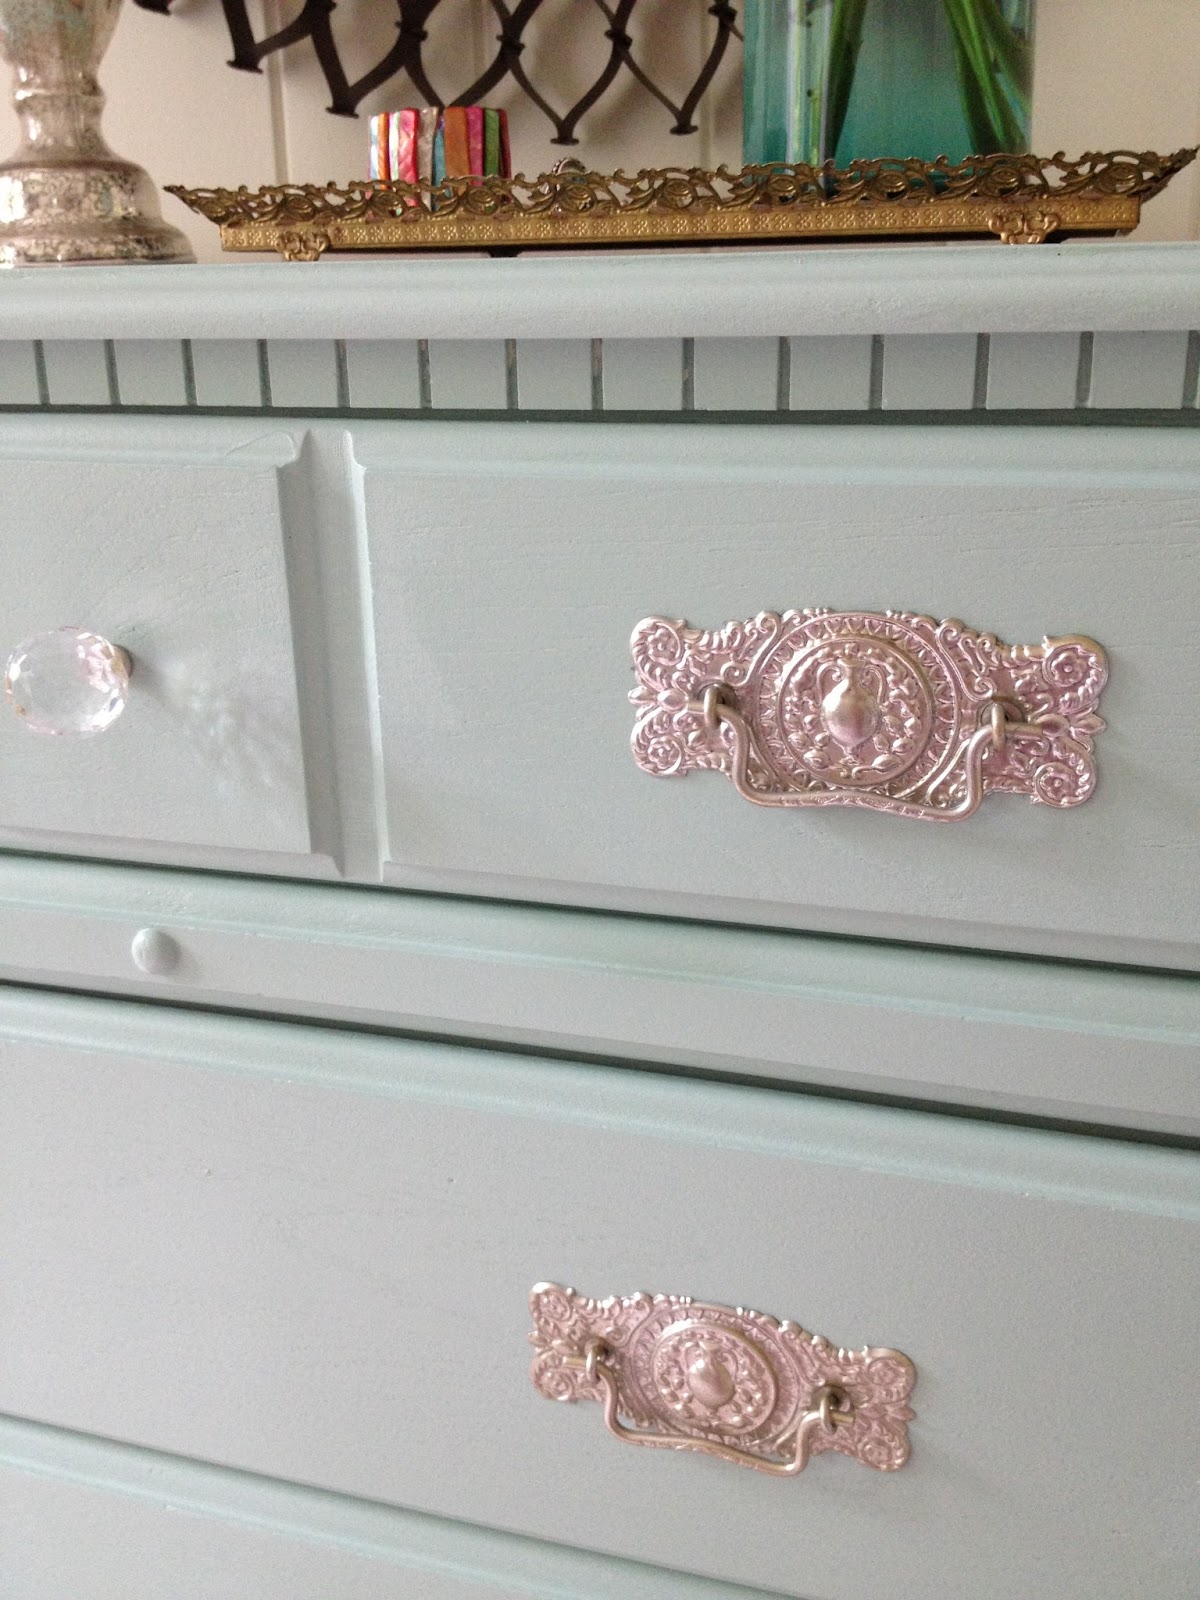 Livelovediy How To Paint Laminate Furniture In 3 Easy Steps